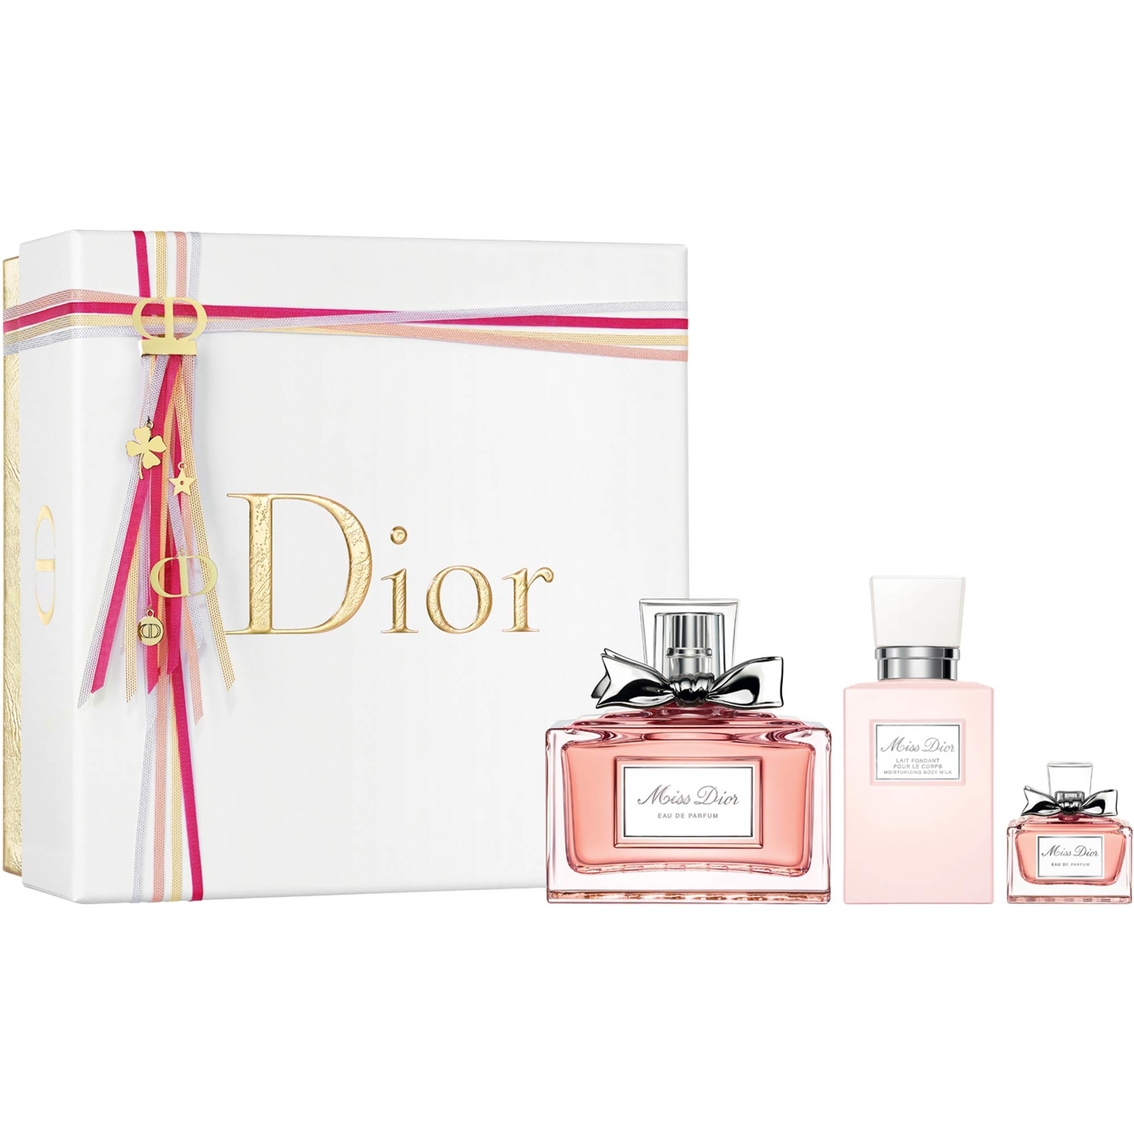 dior gift set for her